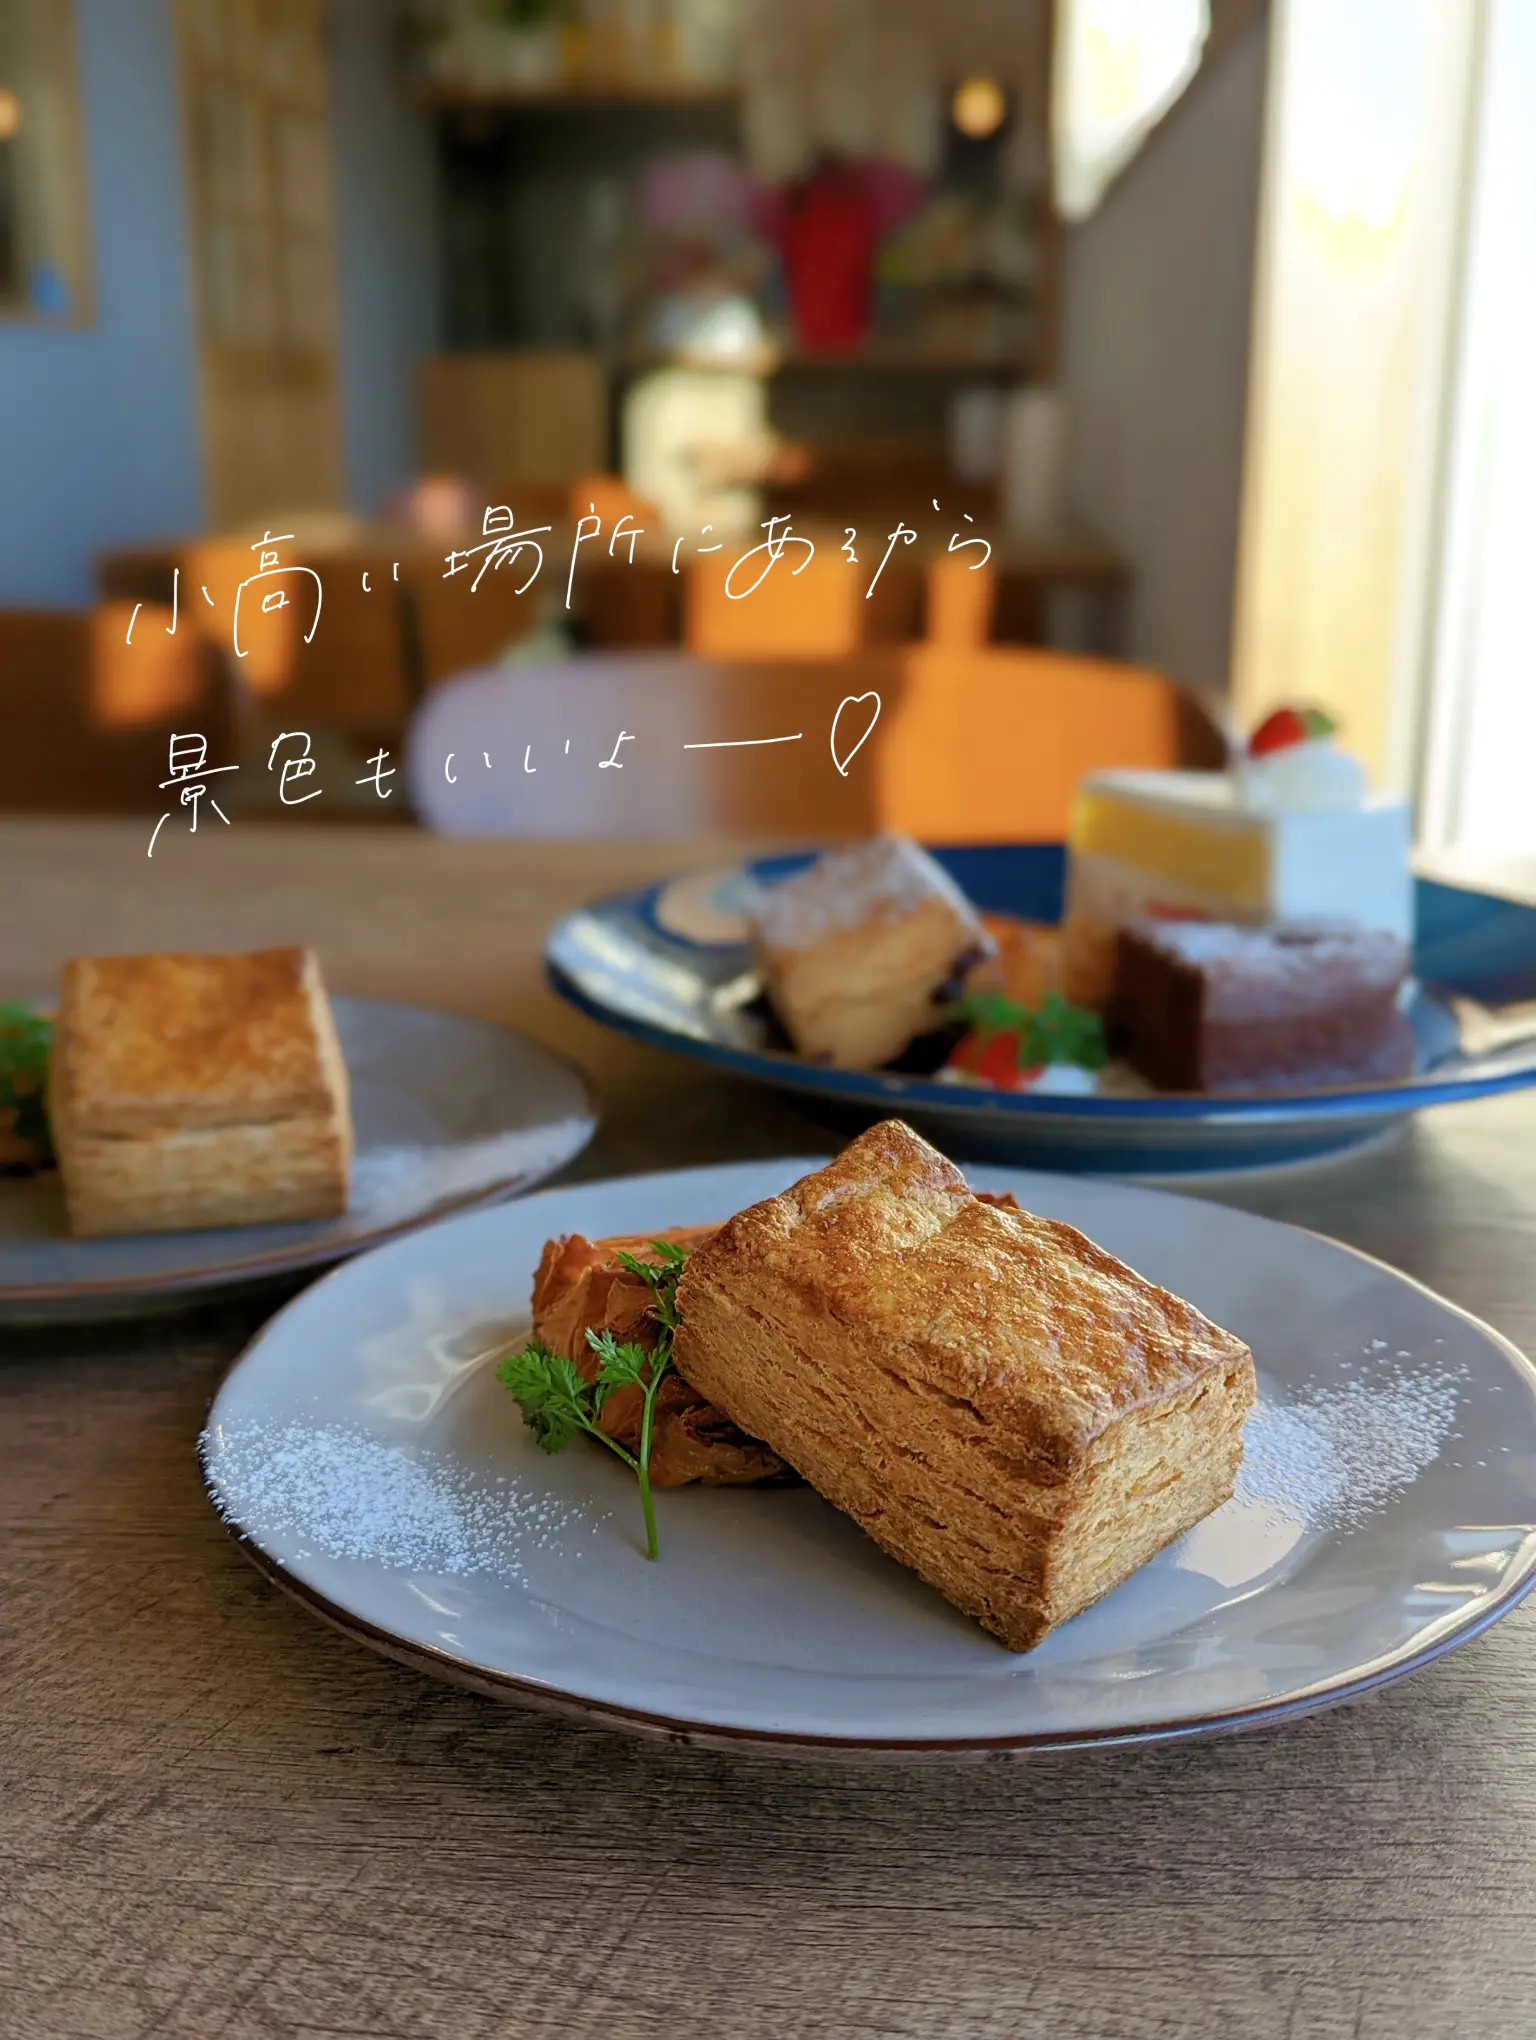 NEW OPEN ✨ 】 I'm sure everyone will like it ♡ Such a cafe has 